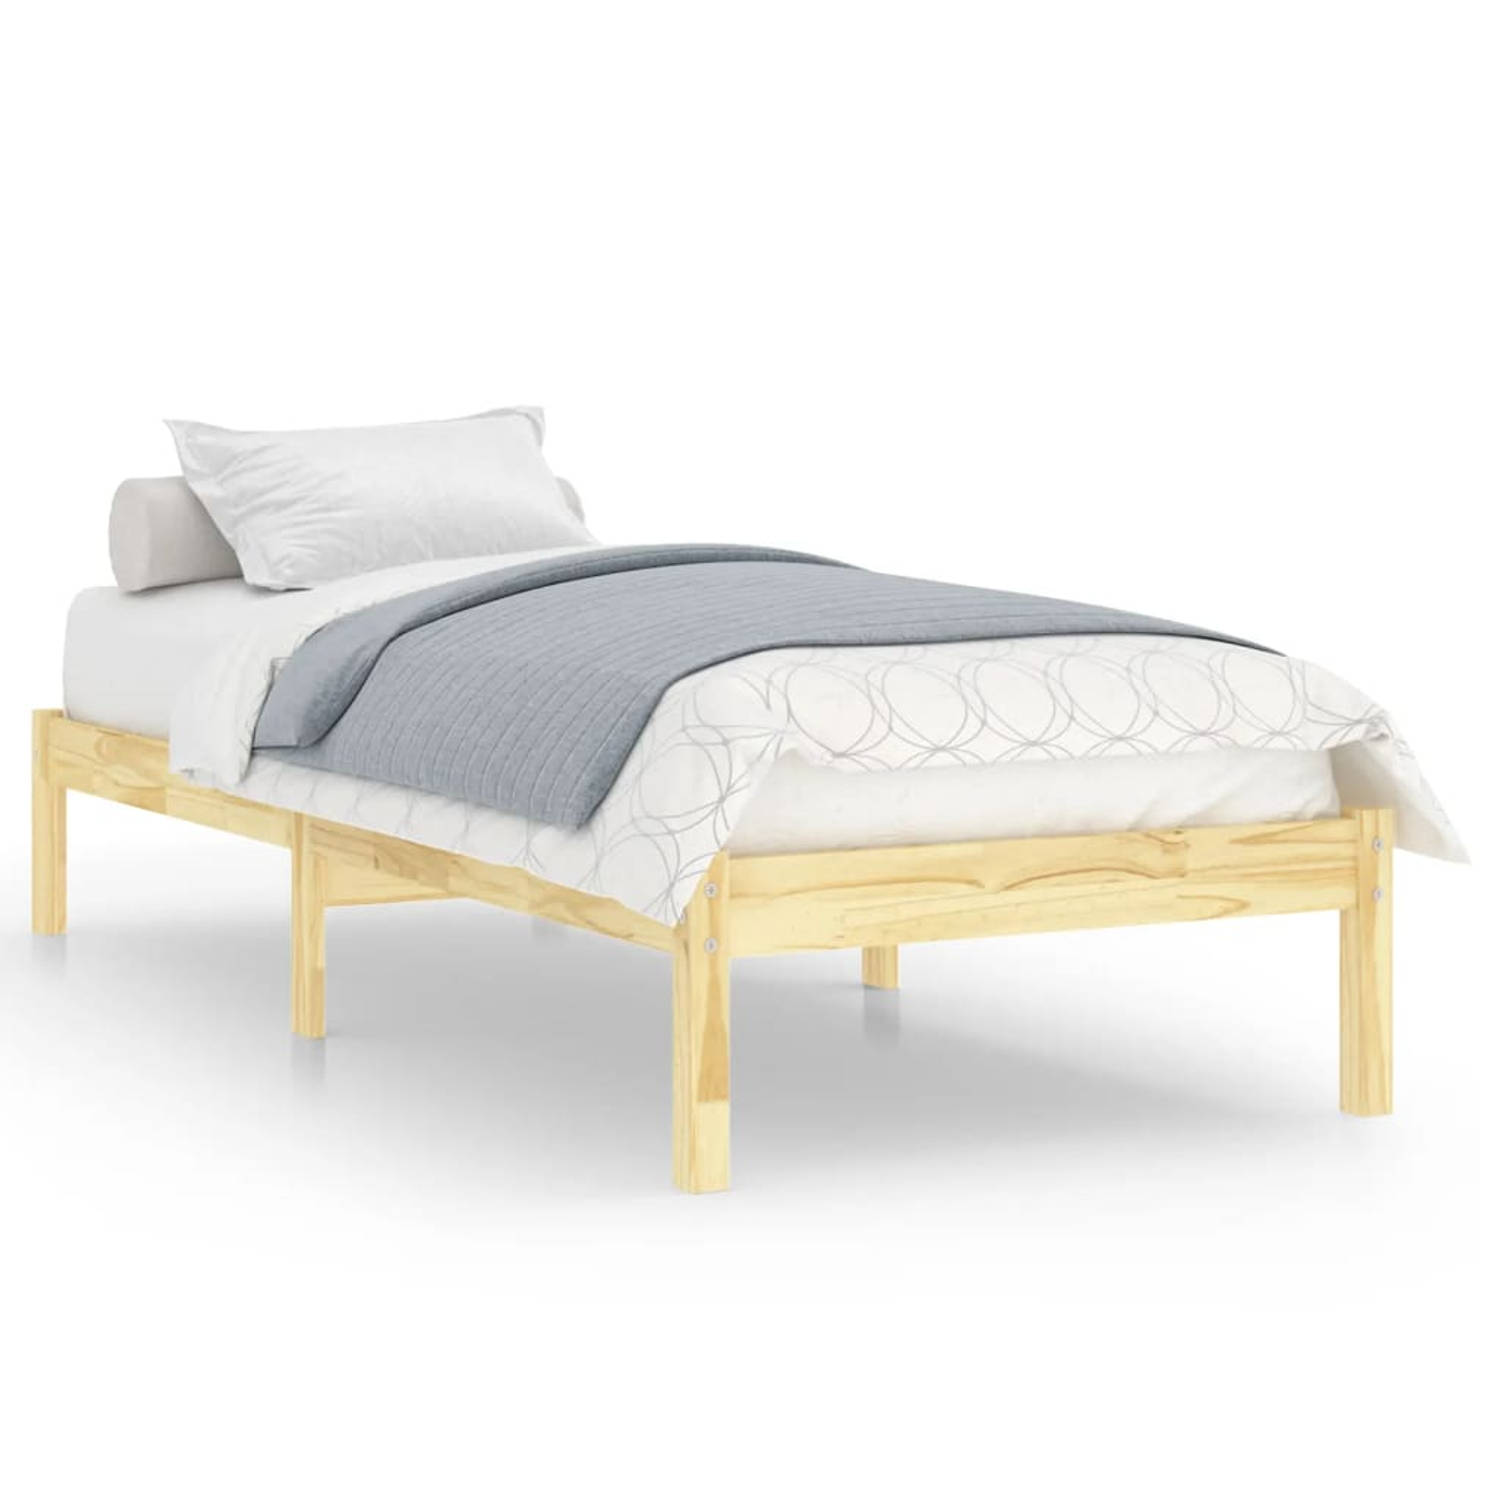 The Living Store Bedframe massief grenenhout 90x200 cm - Bed